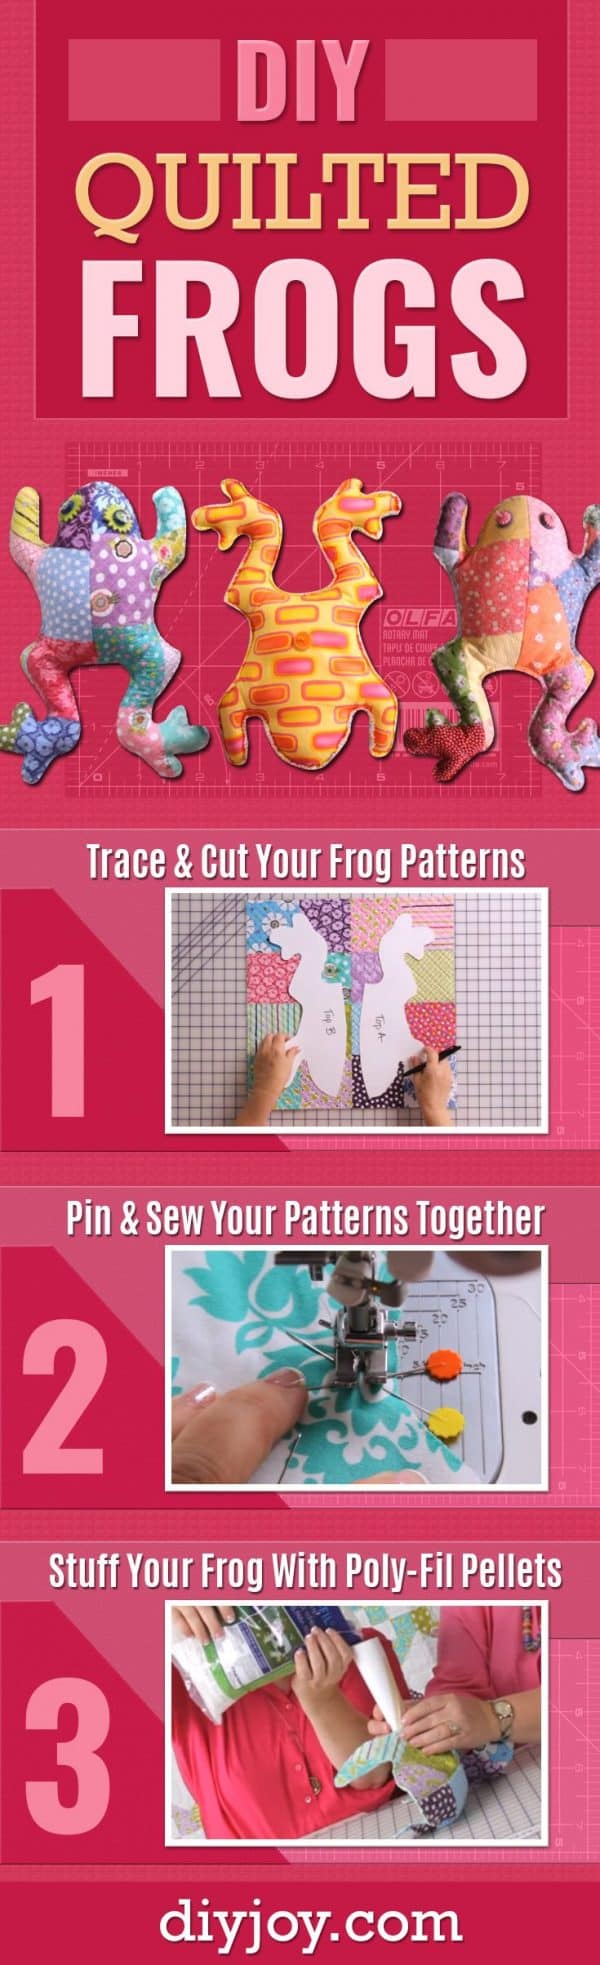 DIY Quilted Frogs - Cute Sewing Projects and Quilting Tutorials Make Creative DIY Gifts for Christmas Presents - Easy Sewing Patterns and Step by Step Tutorials - Home Decor and Crafts for Women